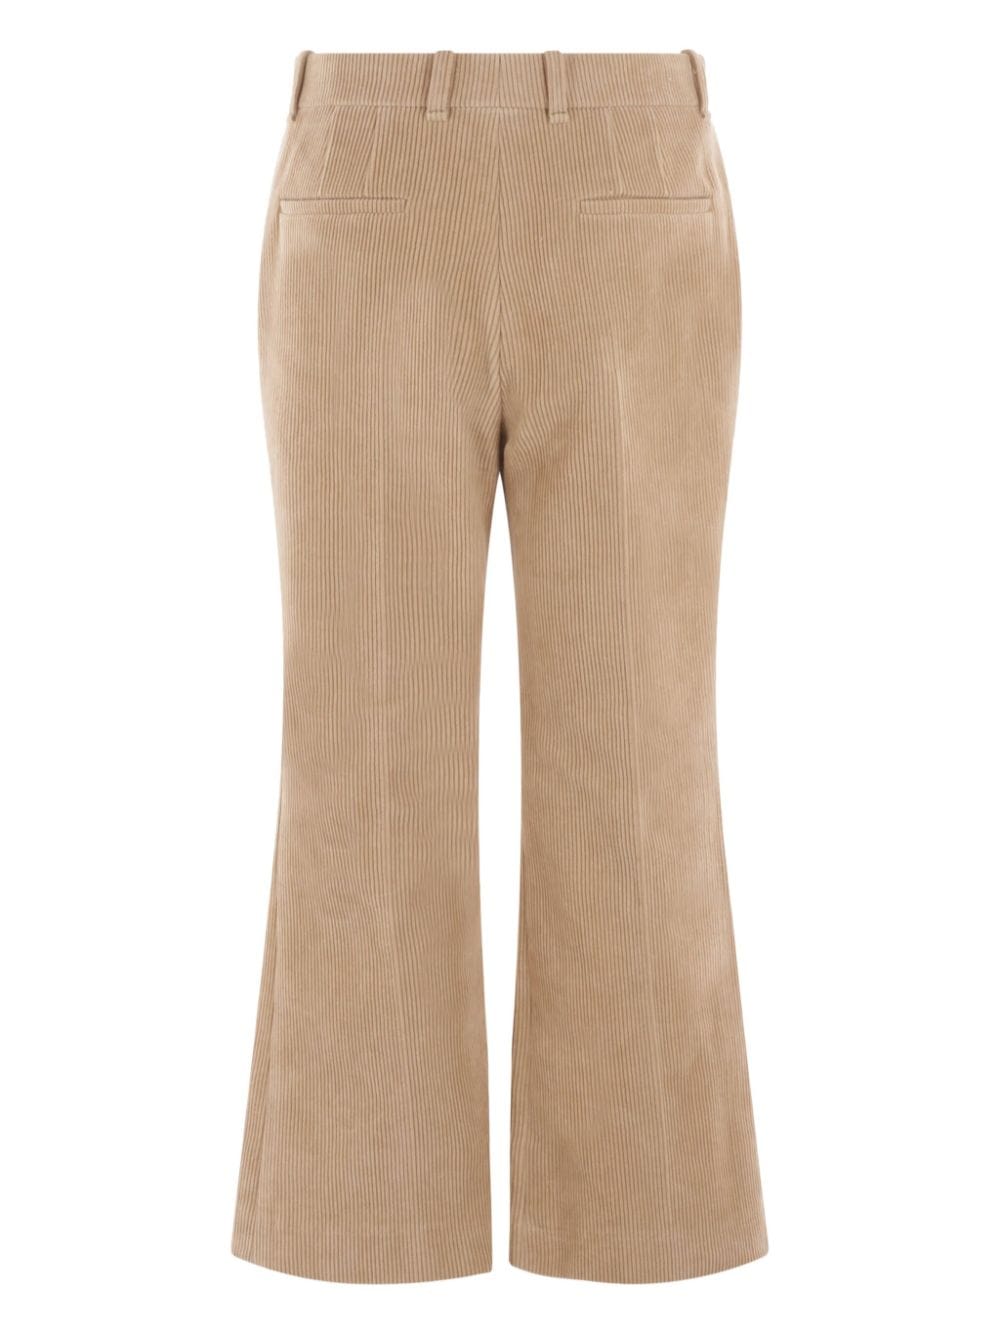 Chloé cropped corduroy trousers - Beige